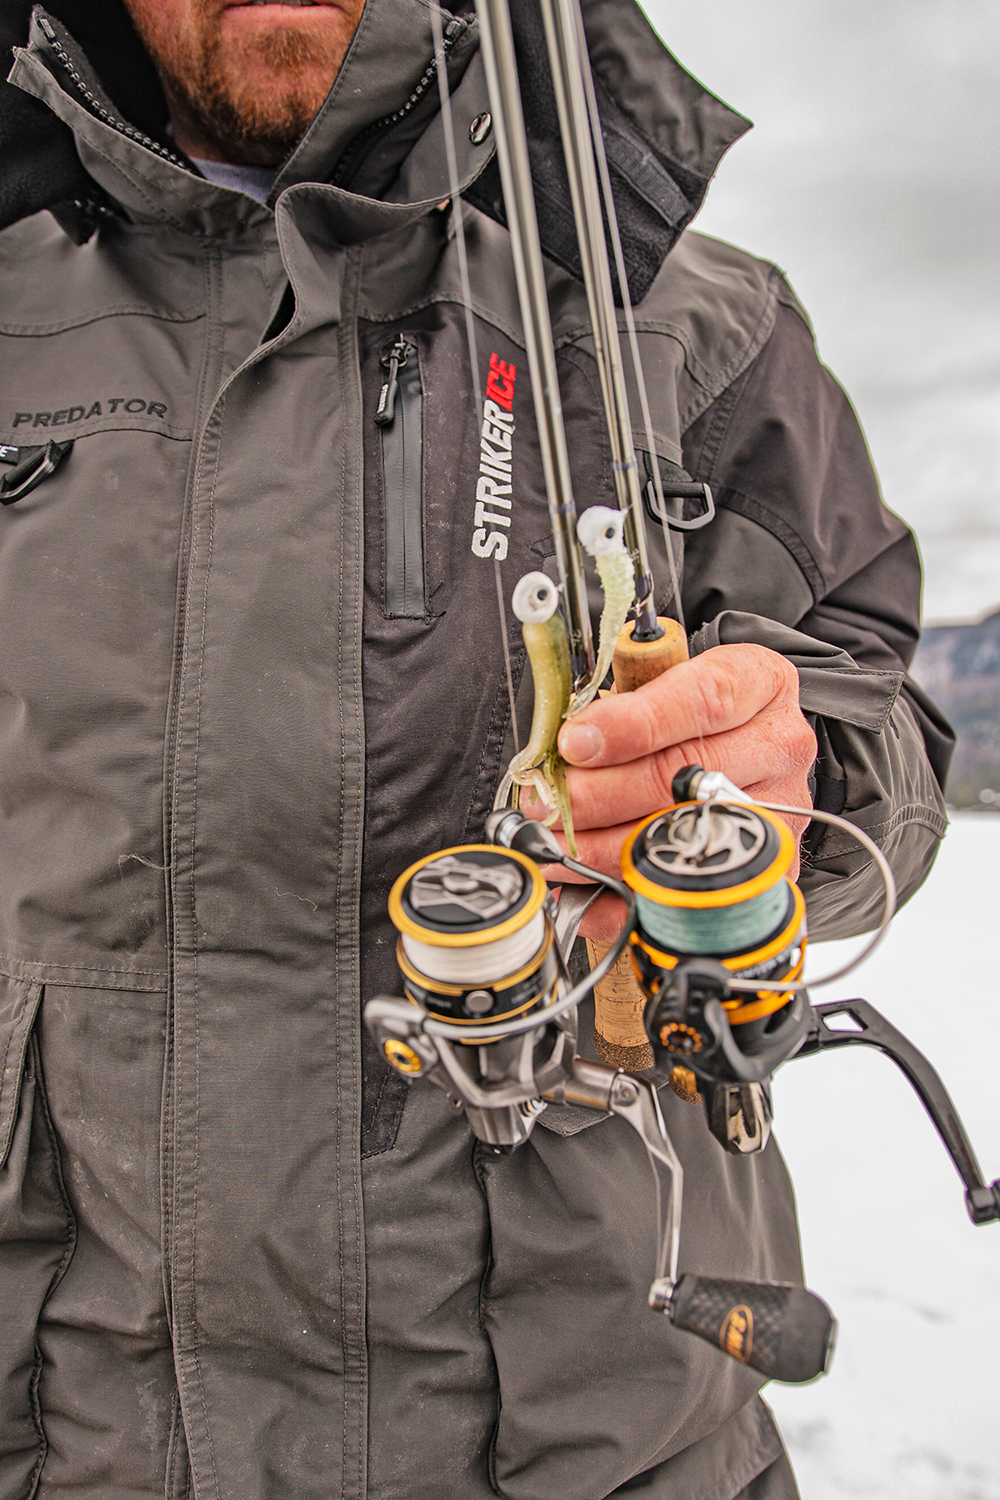 //content.osgnetworks.tv/infisherman/content/photos/Ice-Trout-Gear.jpg